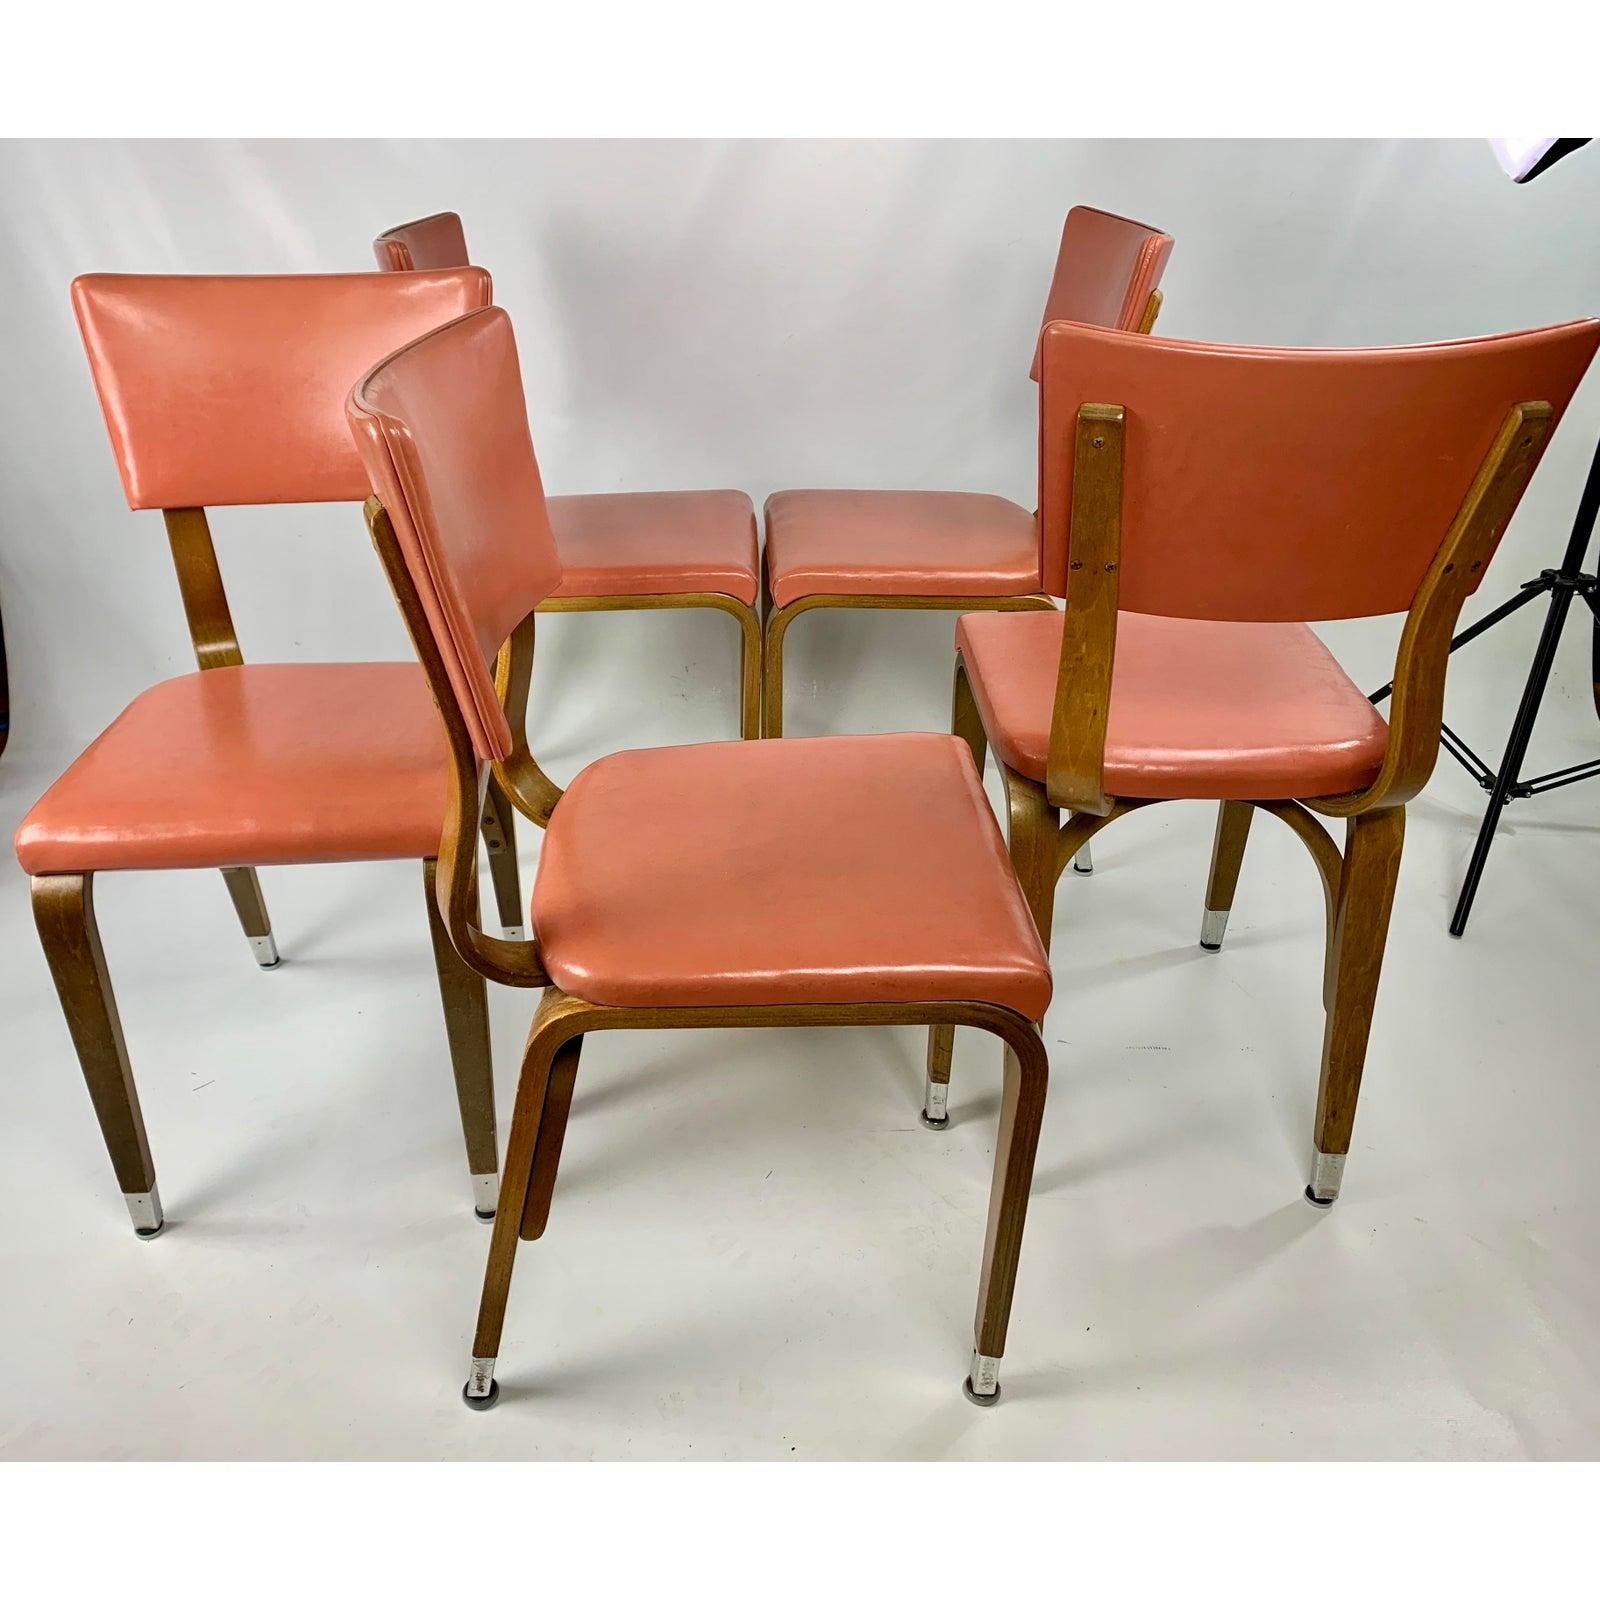 All chairs are sturdy and in good condition. 14 chairs available.